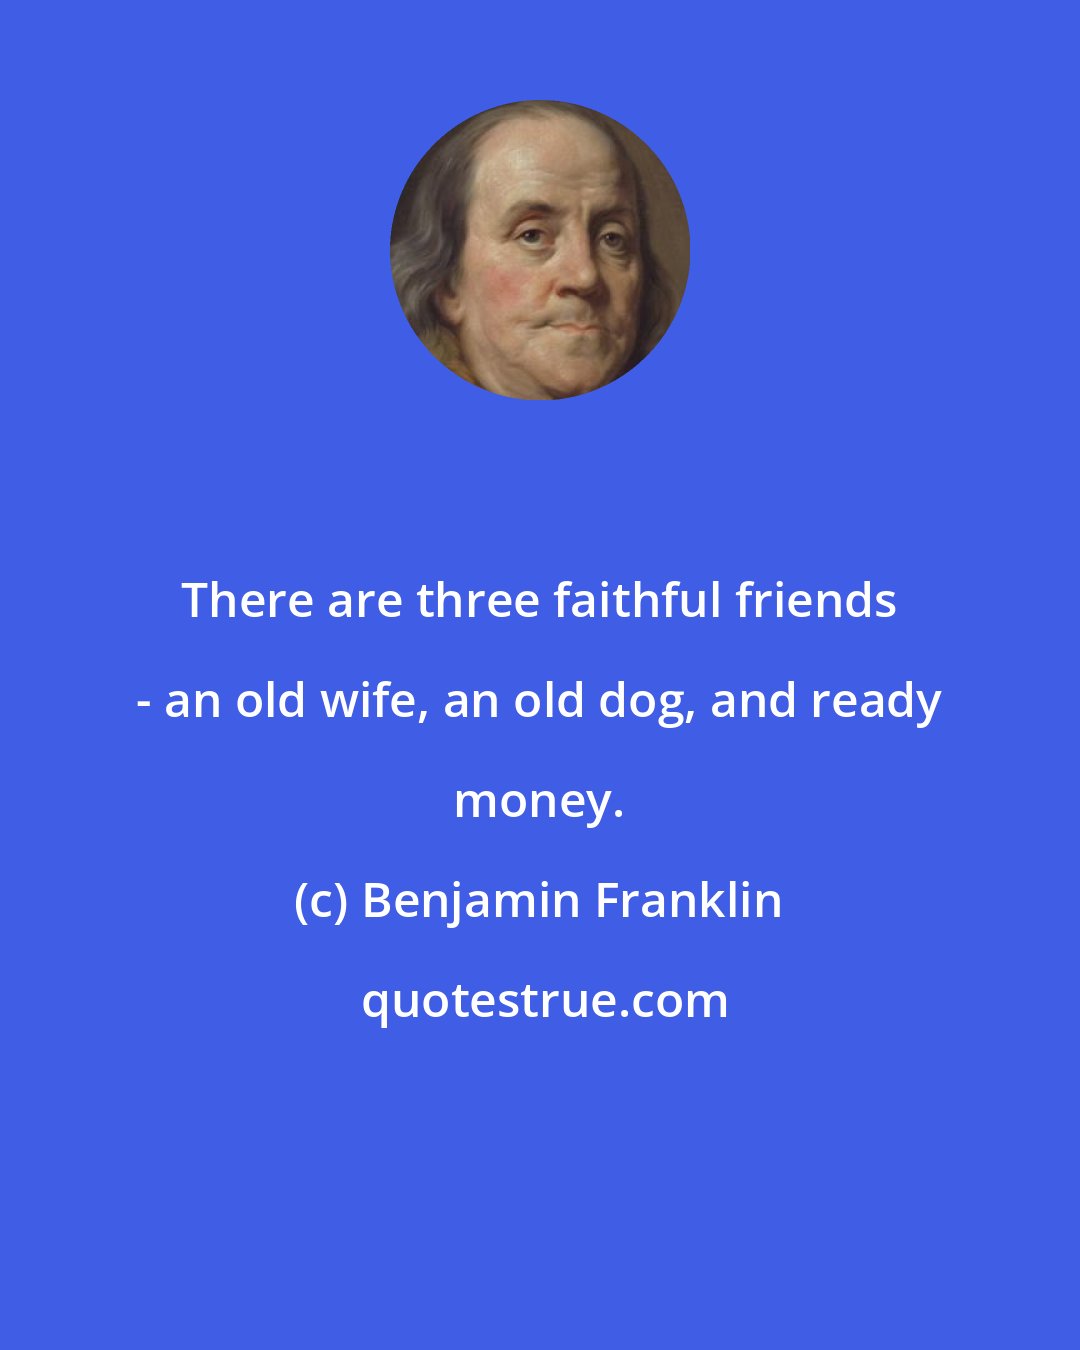 Benjamin Franklin: There are three faithful friends - an old wife, an old dog, and ready money.